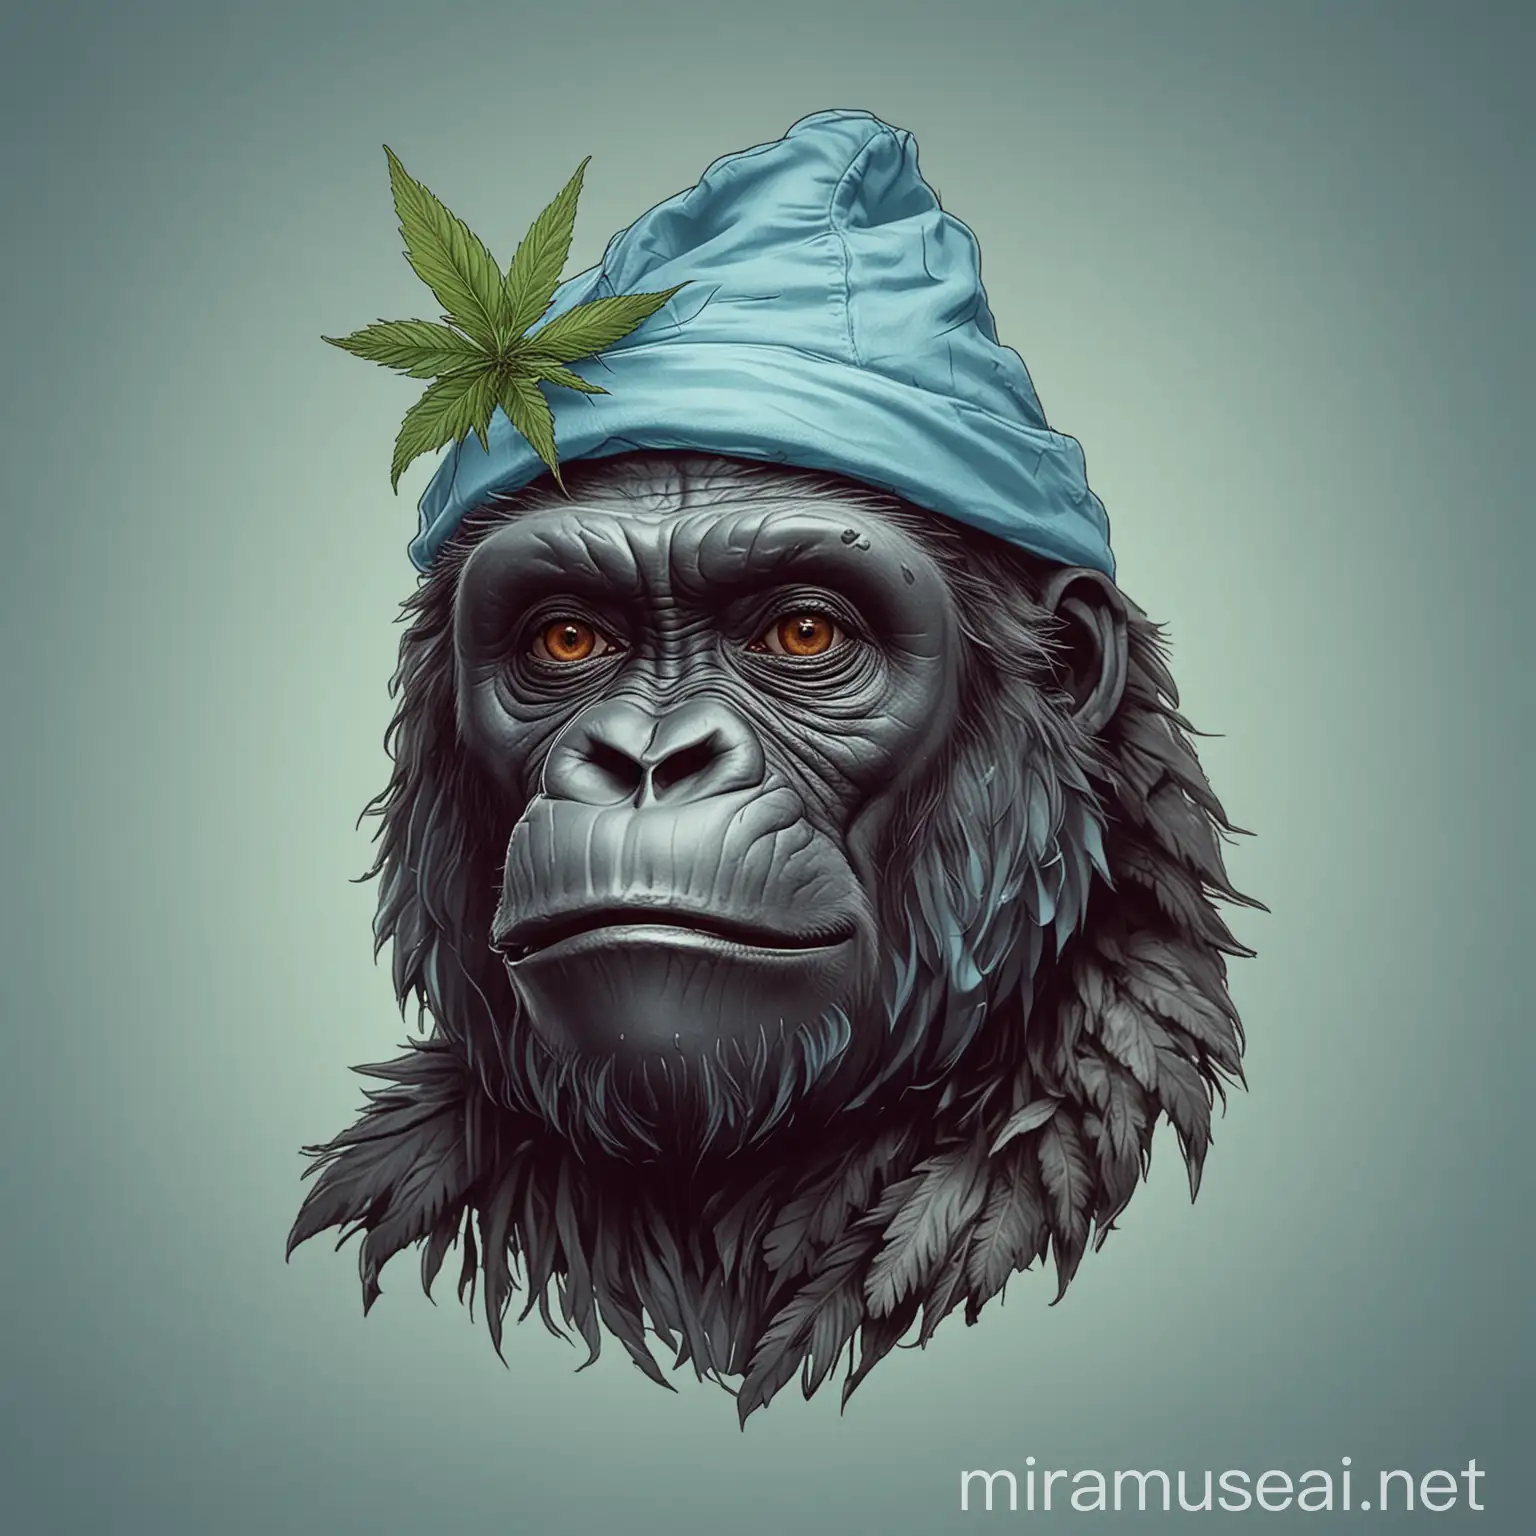 Please create an avatar for a Telegram page with the following characteristics:

Title on the avatar: Hydro Fast
Background color: light blue or something similar
The background should have an illustration of marijuana
On top of the marijuana illustration, there should be an illustration of a gorilla head.
